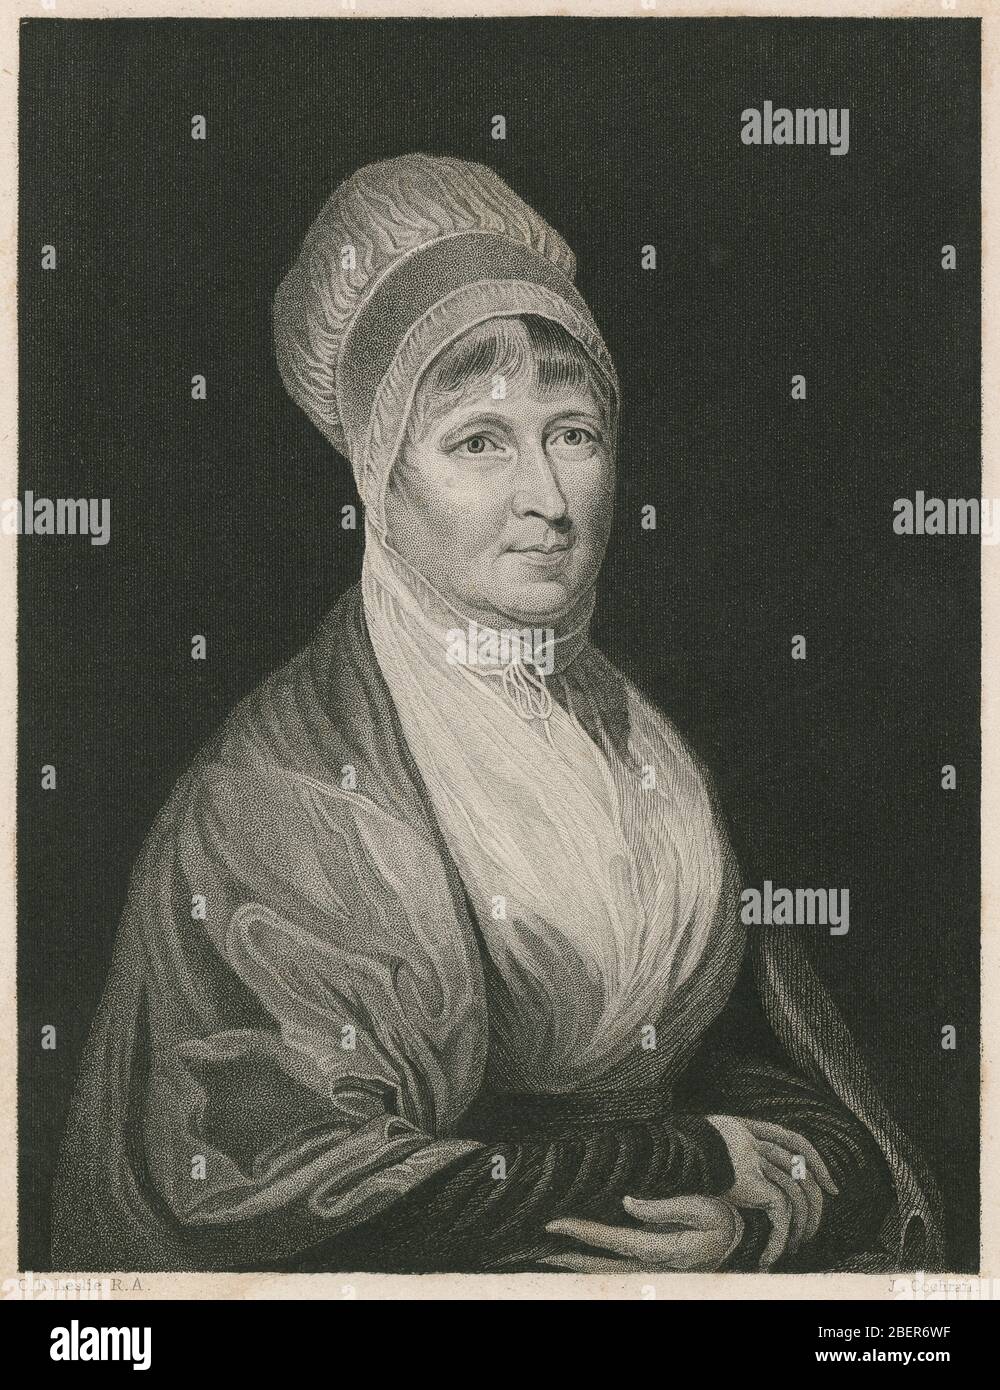 Antique engraving, Elizabeth Fry. Elizabeth Fry (1780-1845), often referred to as Betsy Fry, was an English prison reformer, social reformer and, as a Quaker, a Christian philanthropist. SOURCE: ORIGINAL ENGRAVING Stock Photo